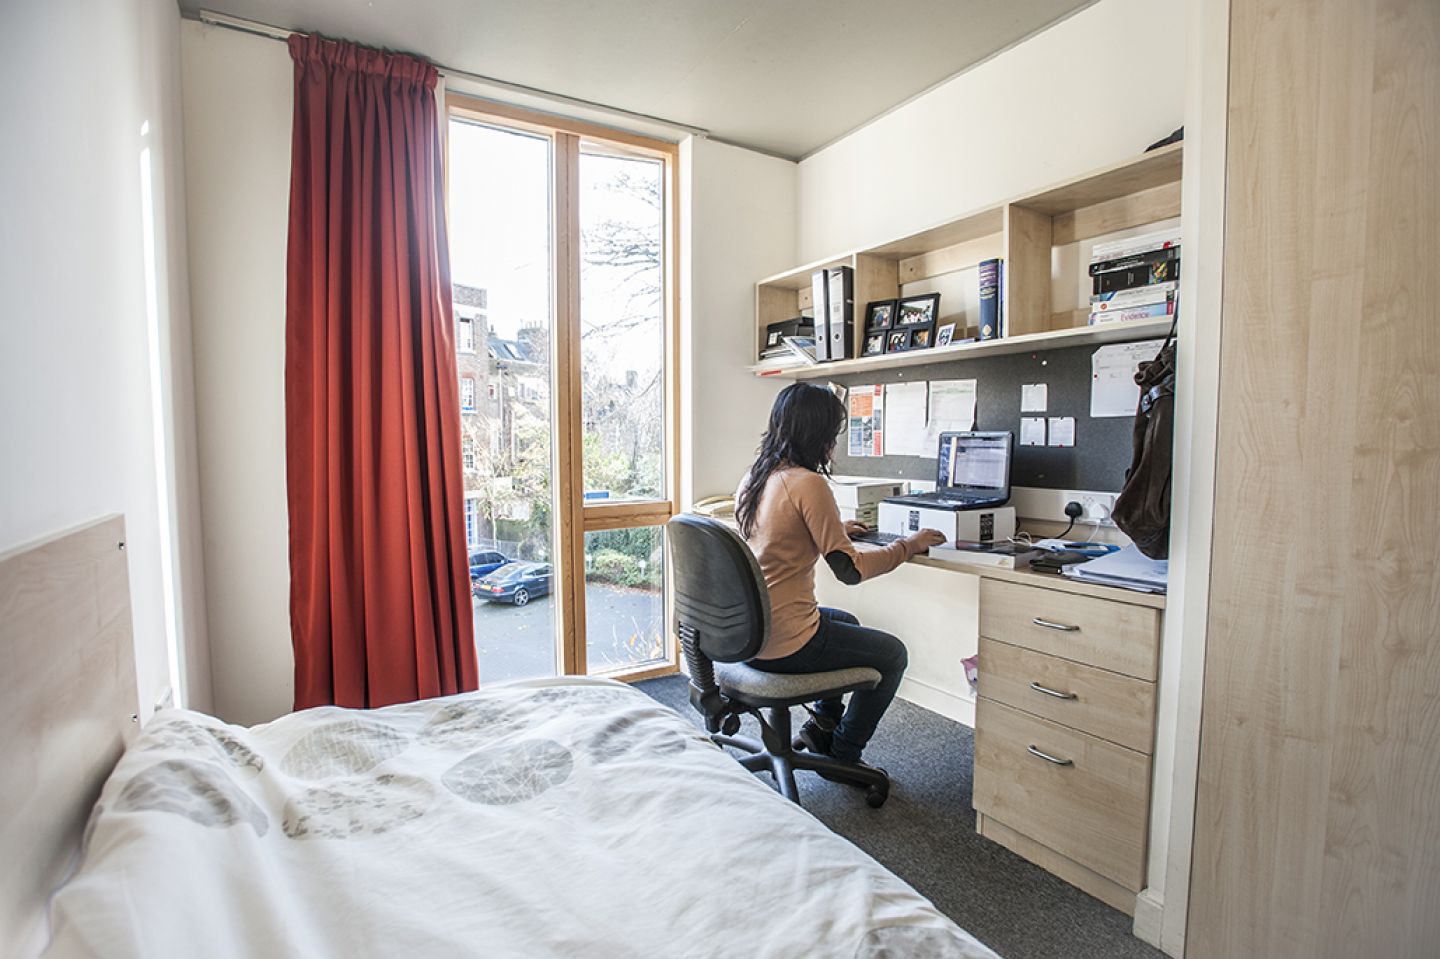 Female student at a desk in bedroom accommodation